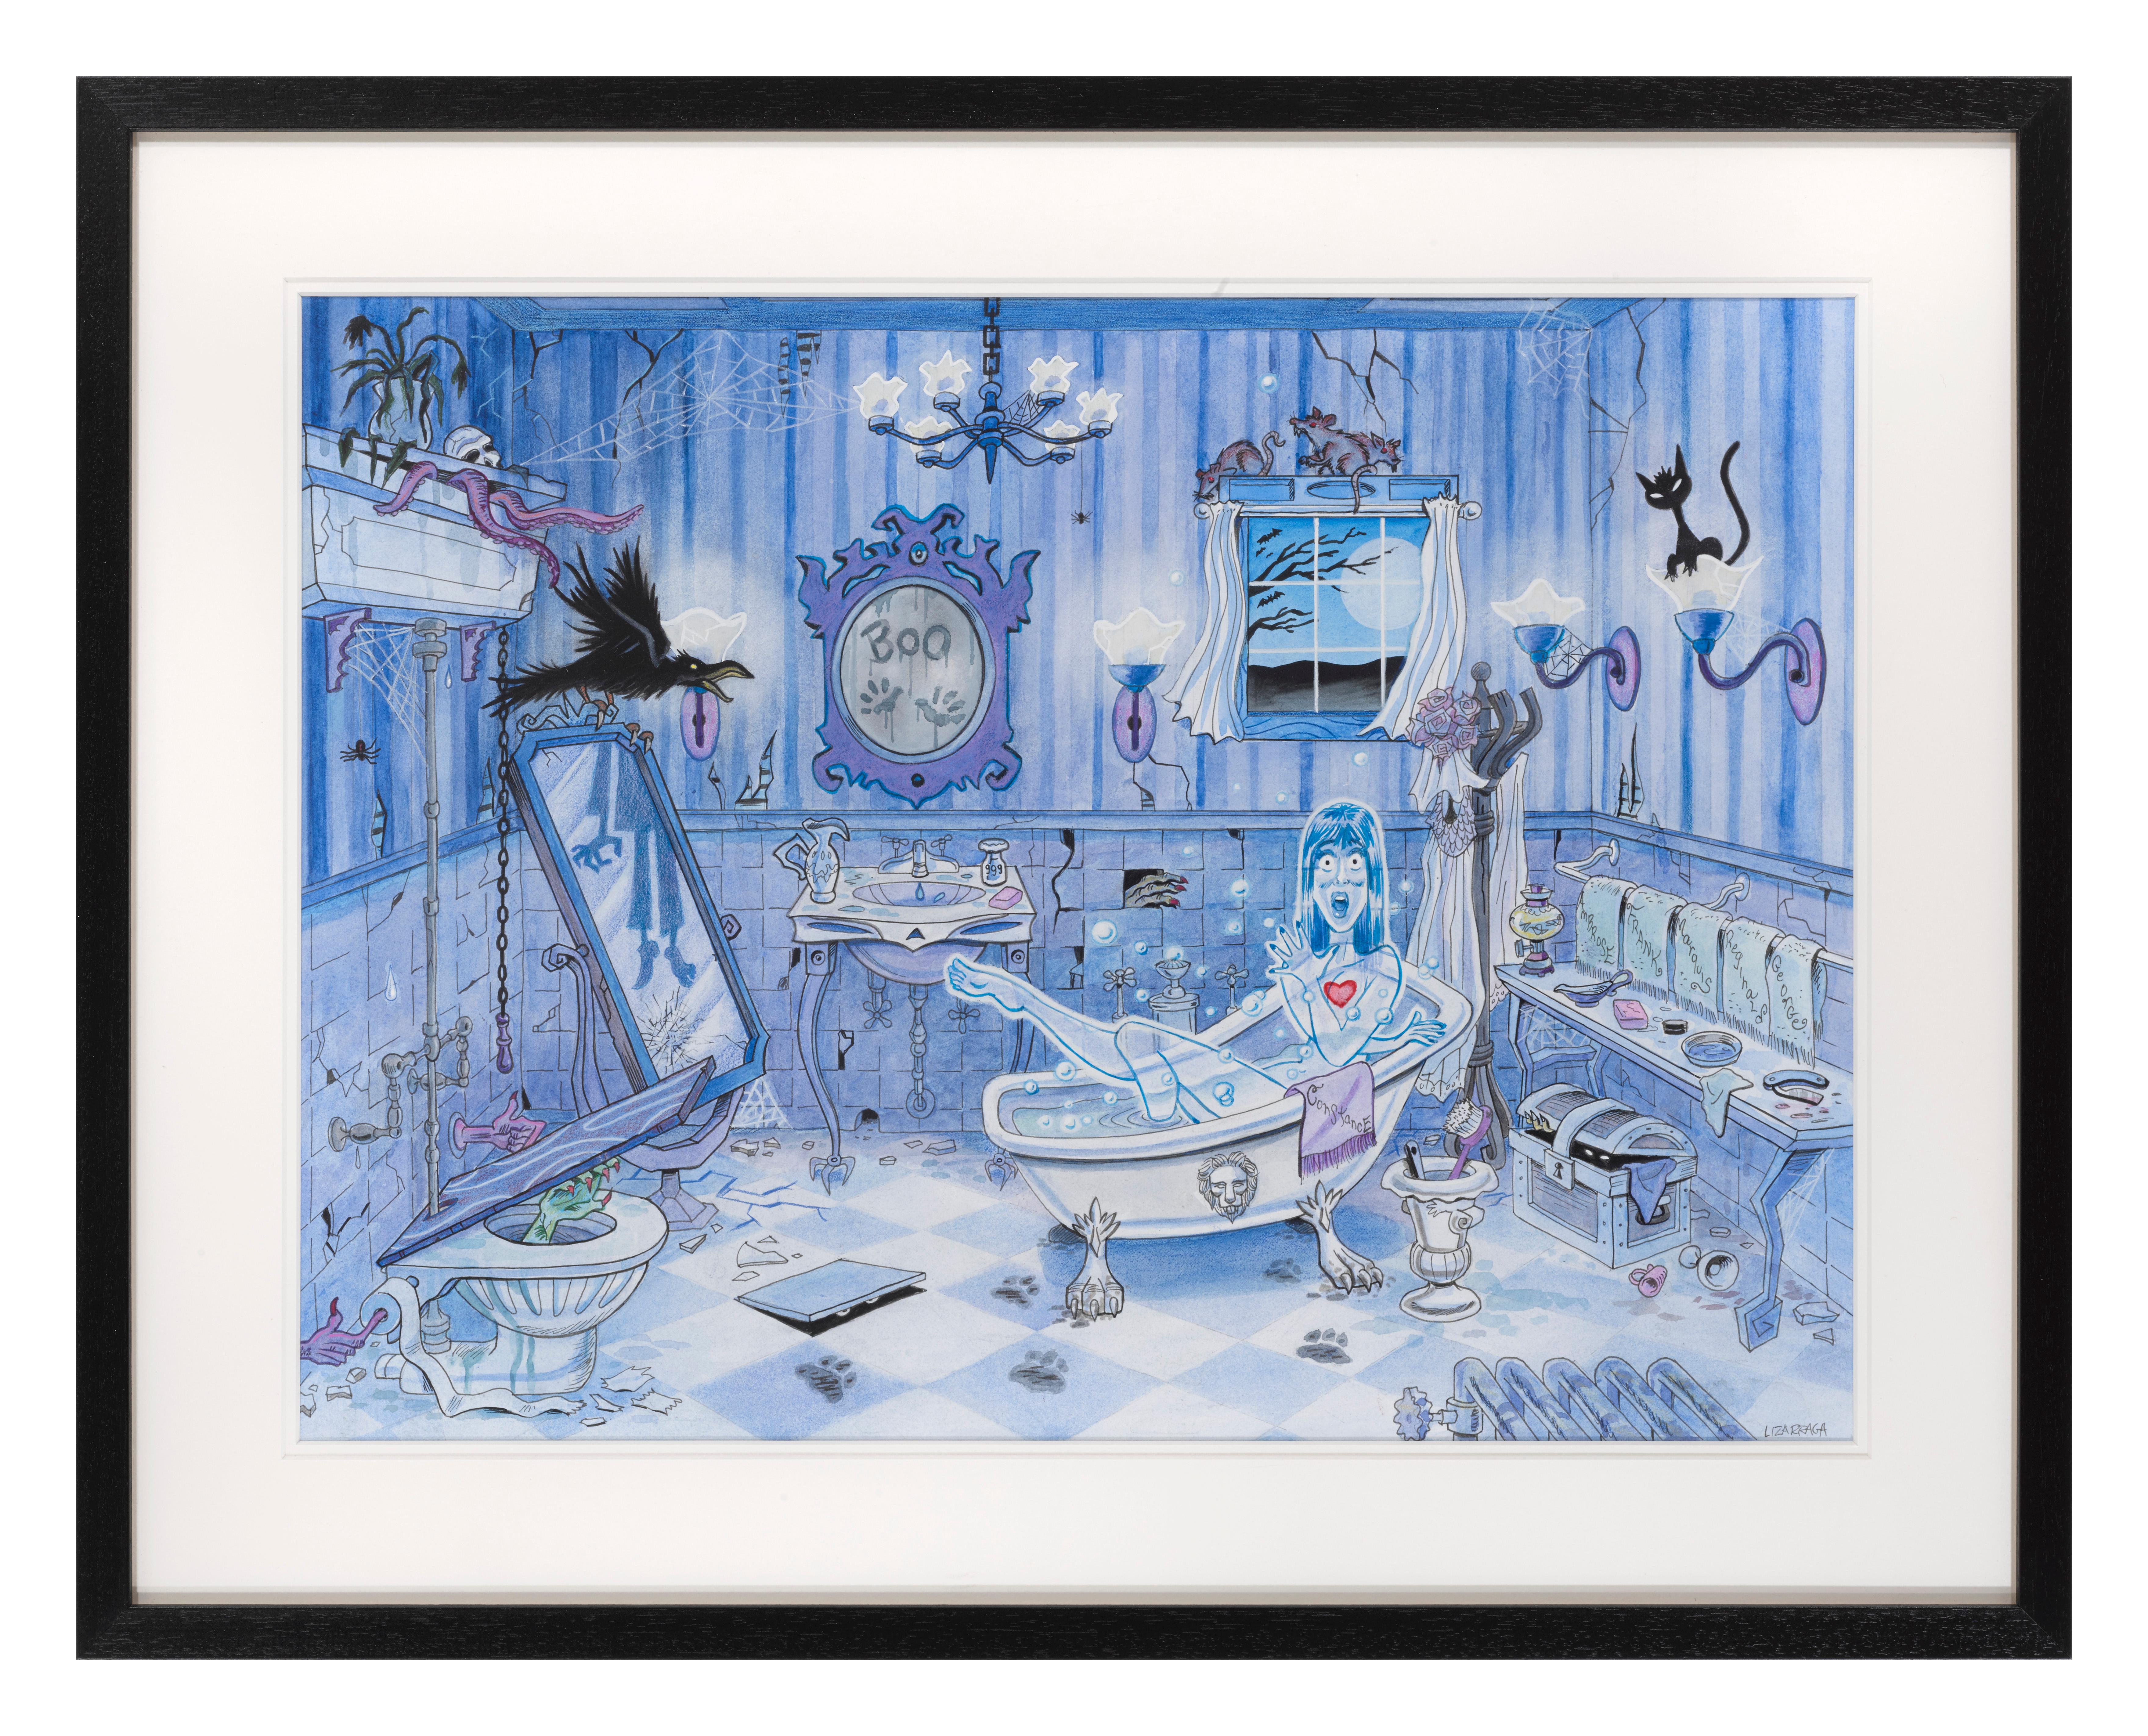 Original artwork acrylic and ink on art board for The Haunted Mansion Bathroom
This art work was used to create a print sold at Disney theme park. The size given is before framing.
This artwork is conservation framed with UV plexiglass in a Sapele